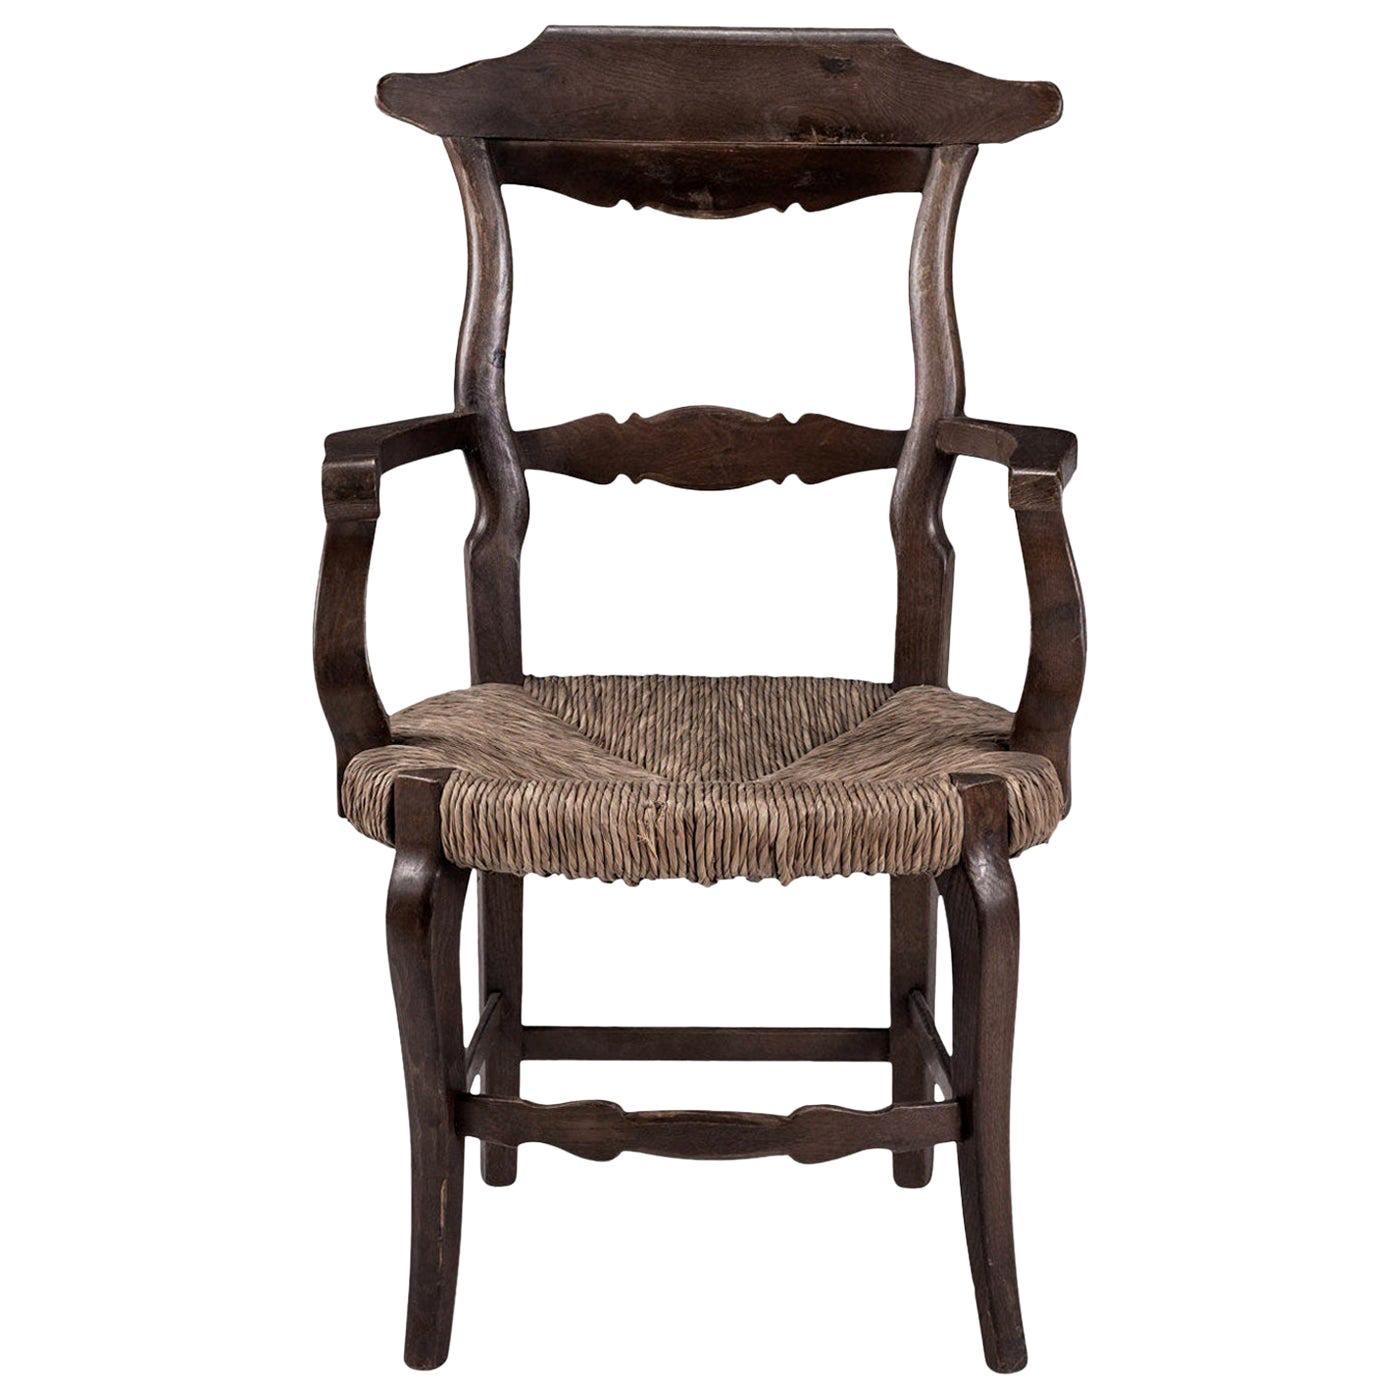 Large Scale Rustic Rush Seat French Chair